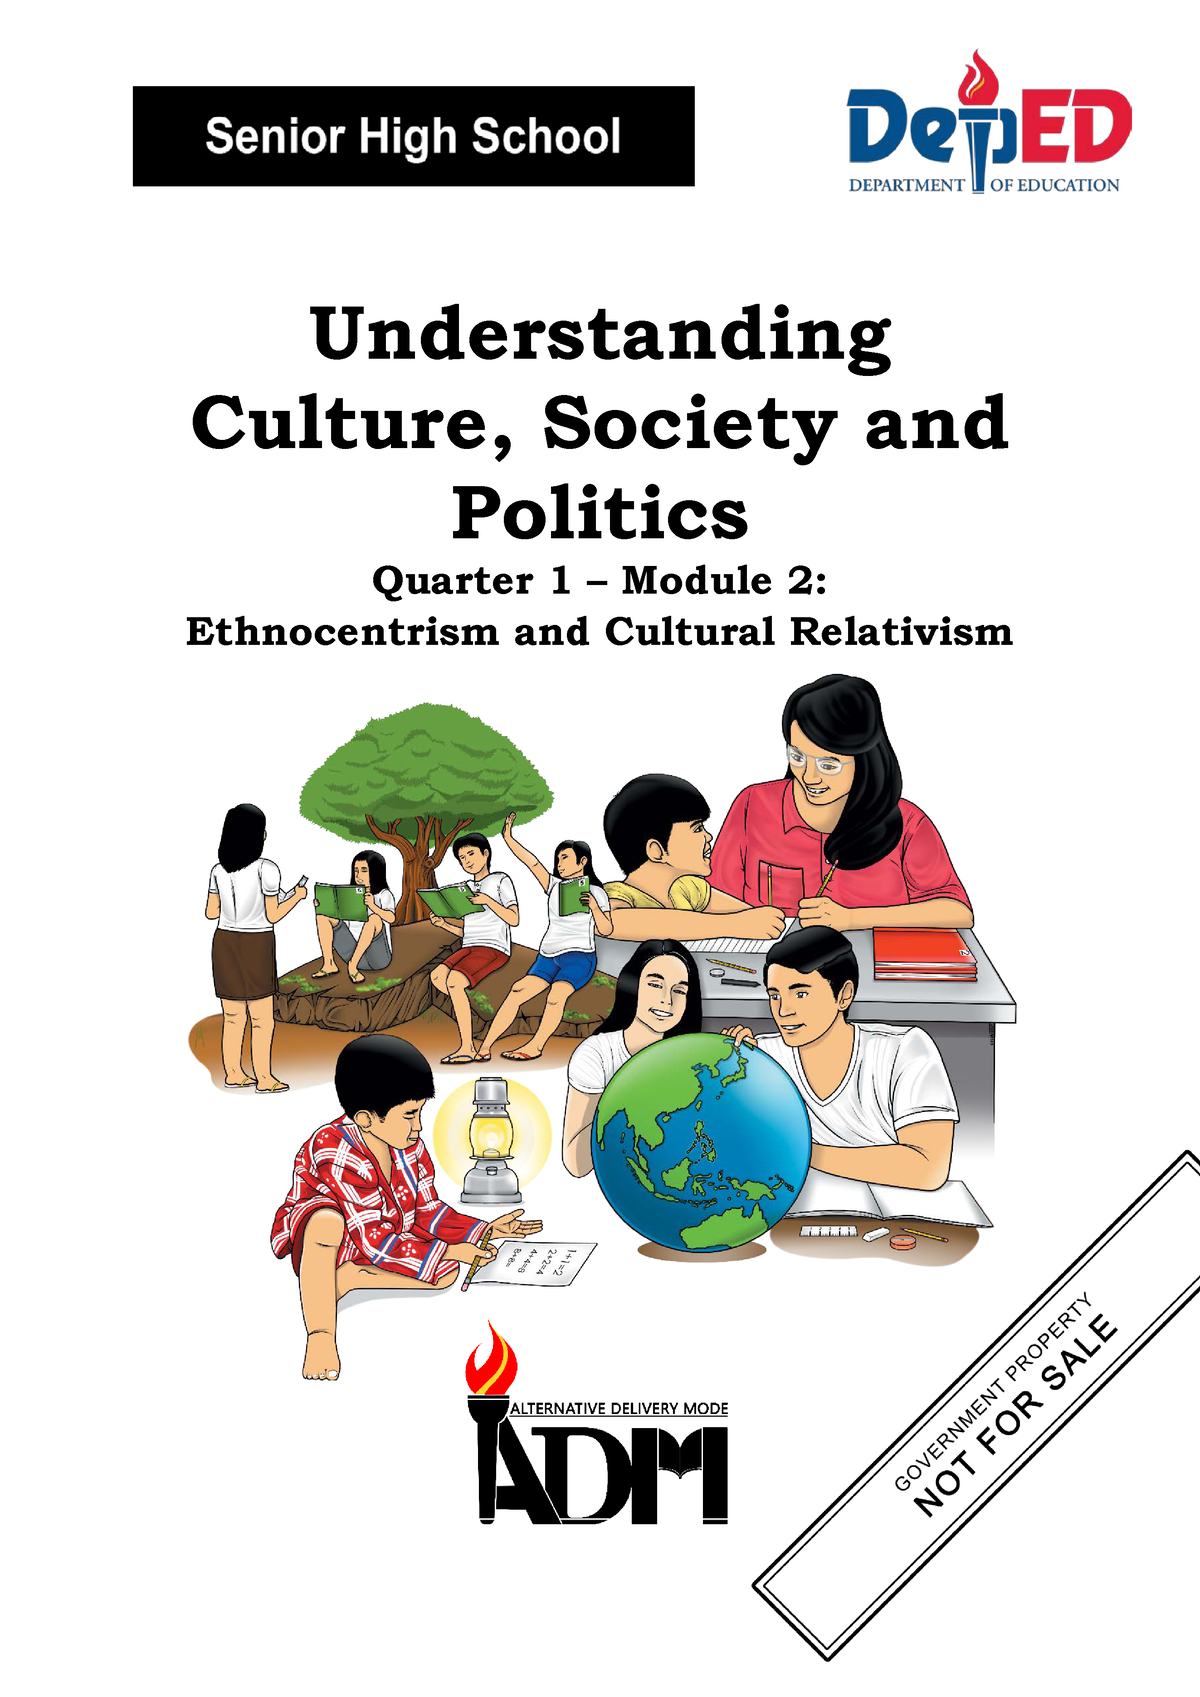 write a comparative analysis about cultural relativism and cultural diversity